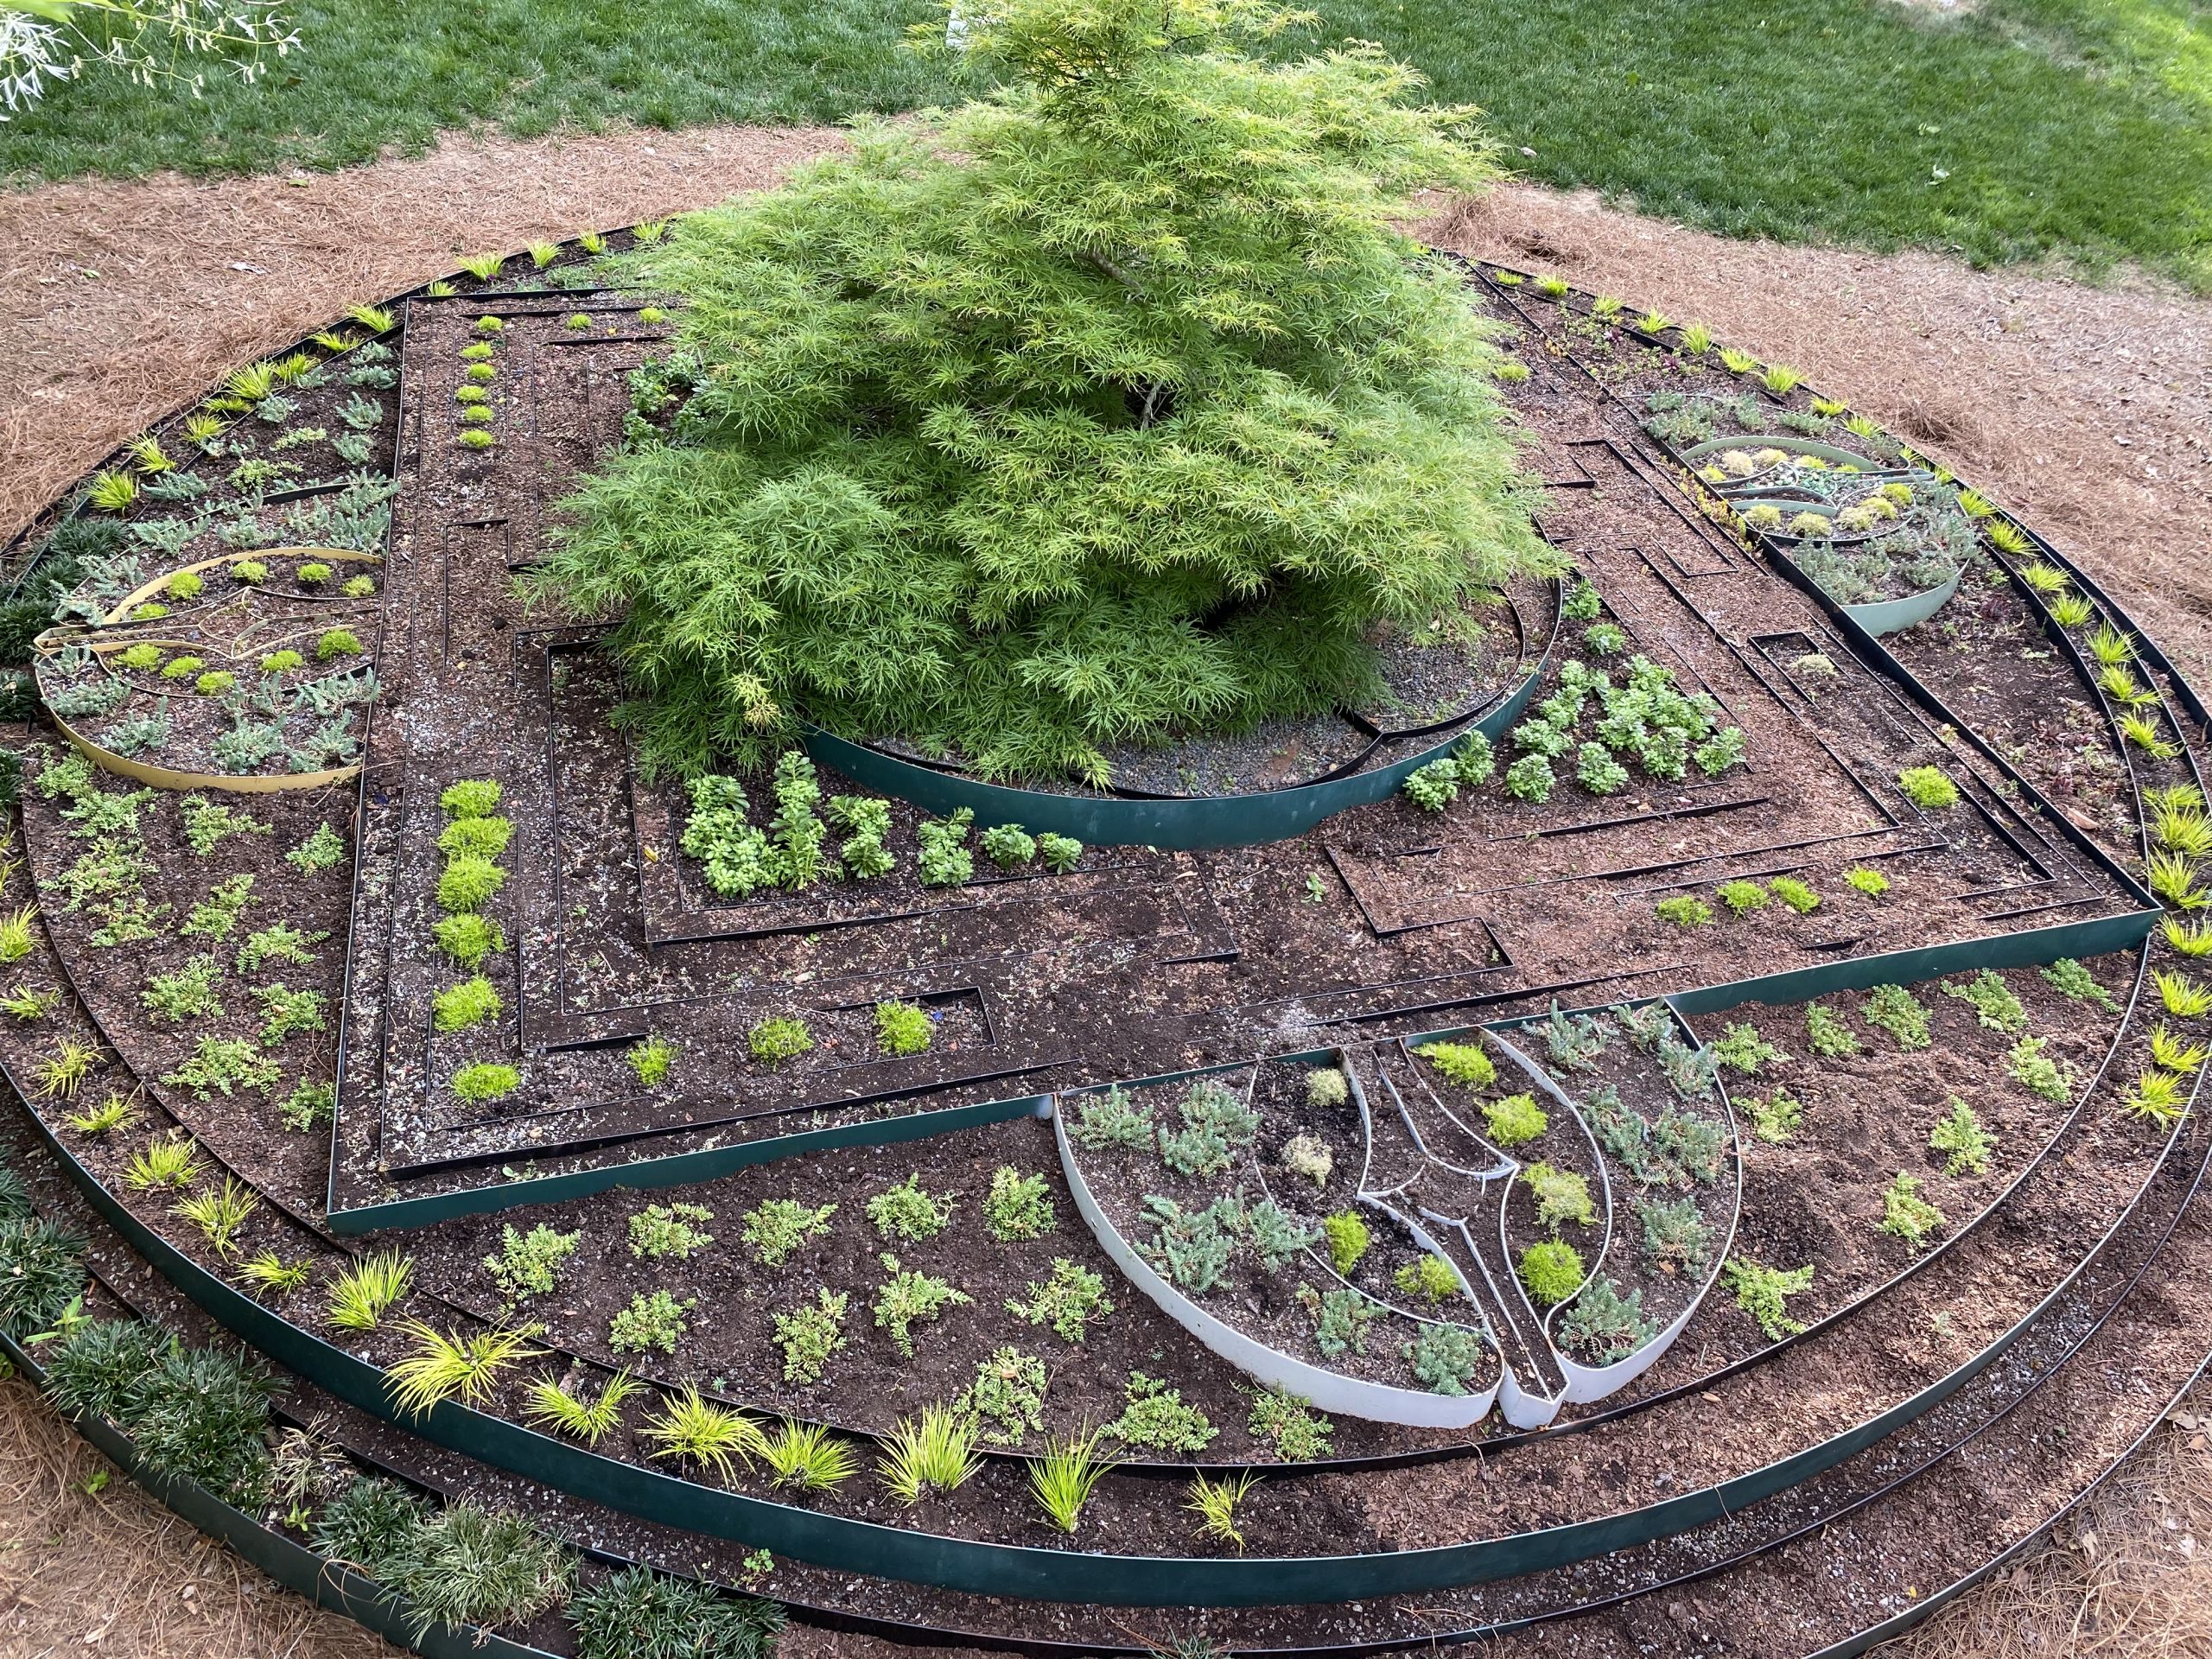 Emory's living mandala: Sections are outlined with dividers and new plants are growing in most sections